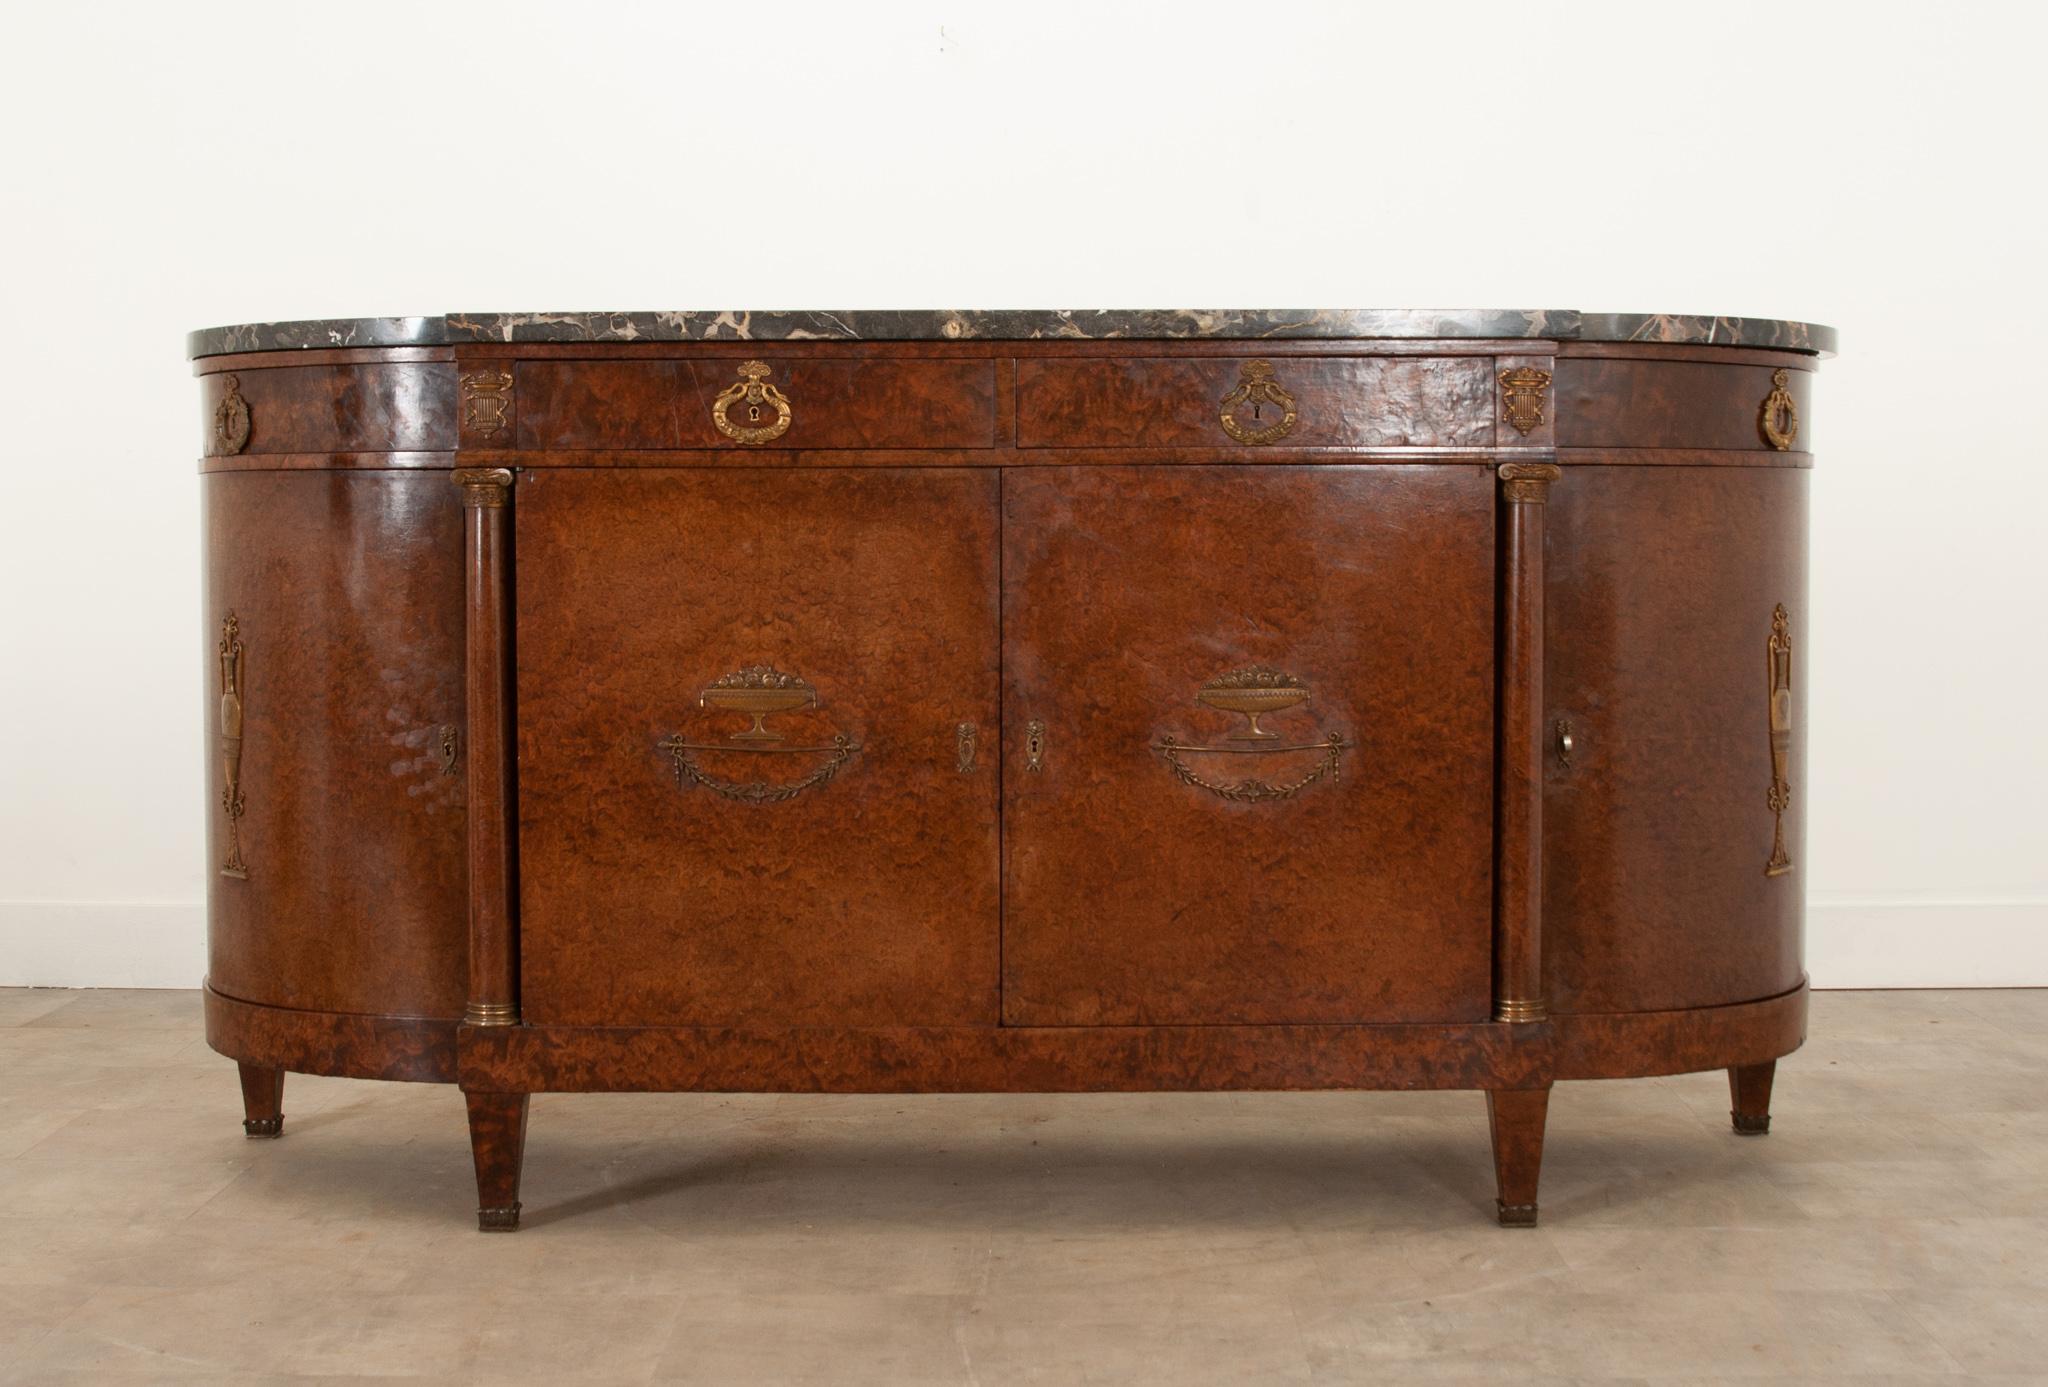 A gorgeous demilune enfilade crafted in France during the 1880s. This piece is all about the Empirically styled details and distinctive burl veneer. The original stunning marble top is shaped to fit the base. The apron houses four drawers with swan